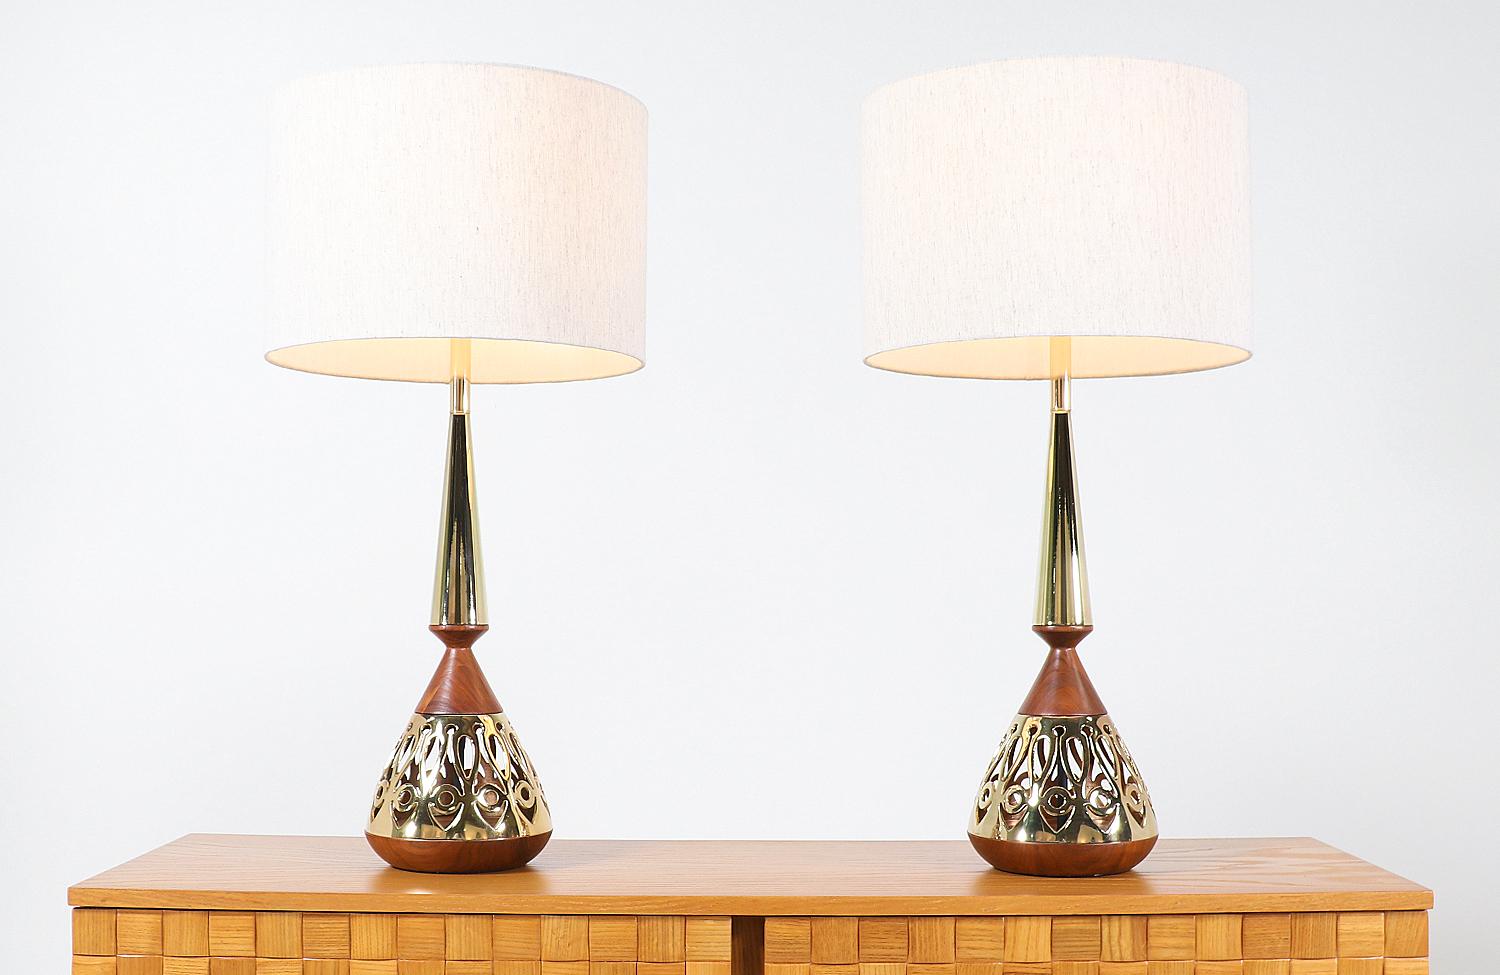 A stunning pair of table lamp designed by Tony Paul for Westwood Industries in the United States, circa 1950s. This dazzling set of table lamps features a richly-grained walnut wood body with newly polished brass details on the base and top of the